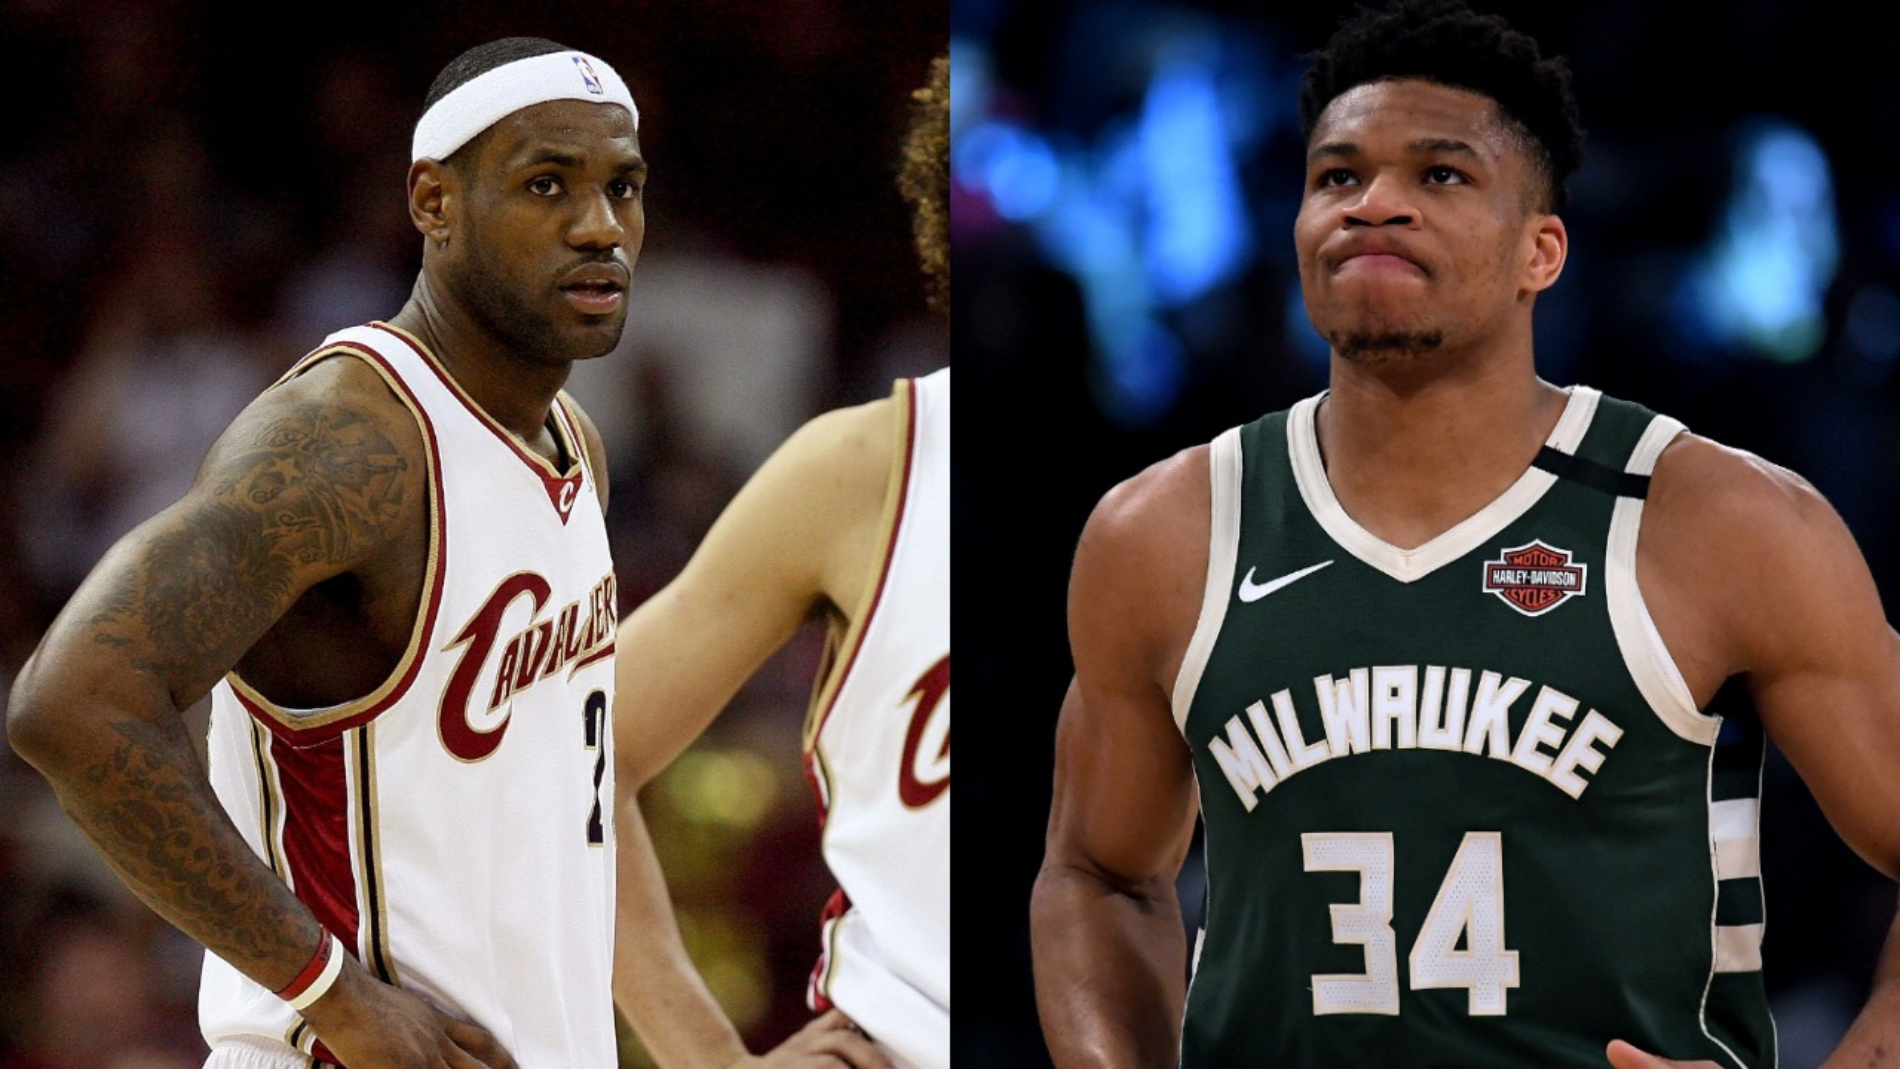 Giannis Antetokounmpo and the Bucks have been a huge a disappointment. Are they proving to be worse than LeBron James' Cavaliers teams?